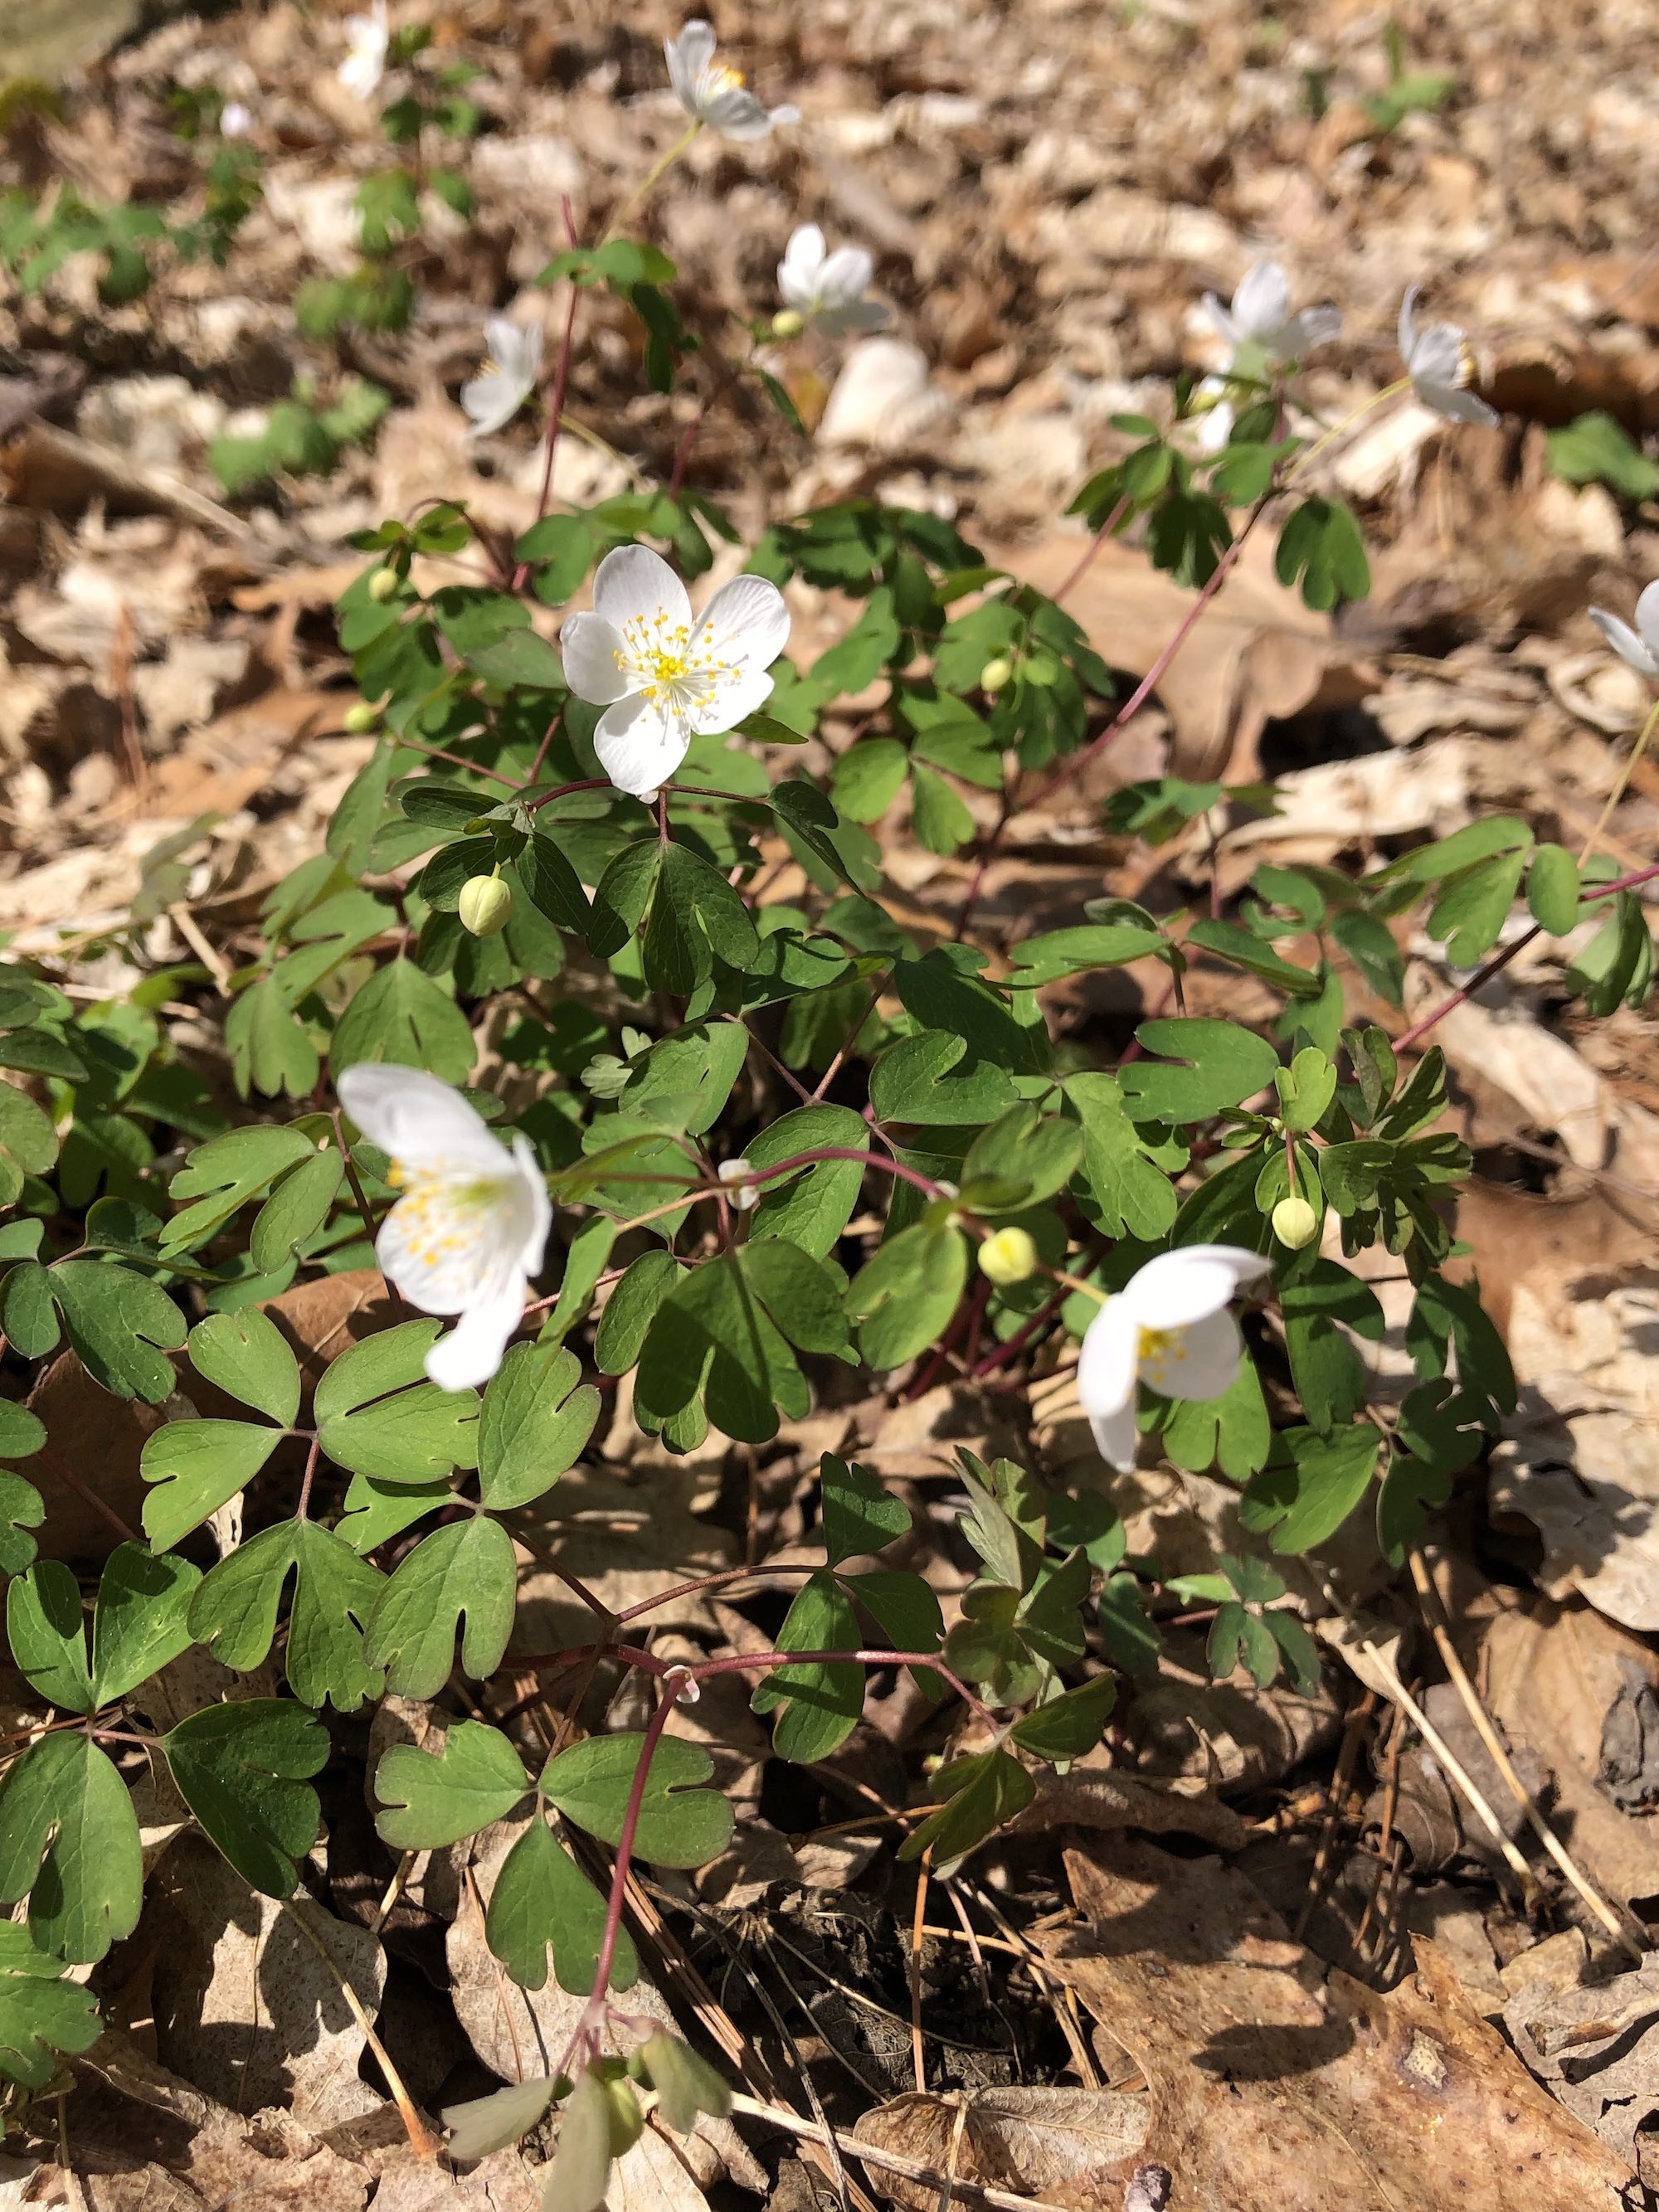 False Rue Anemone in the University of Wisconsin Arboretum Native Gardens in Madison, Wisconsin on April 17, 2021.